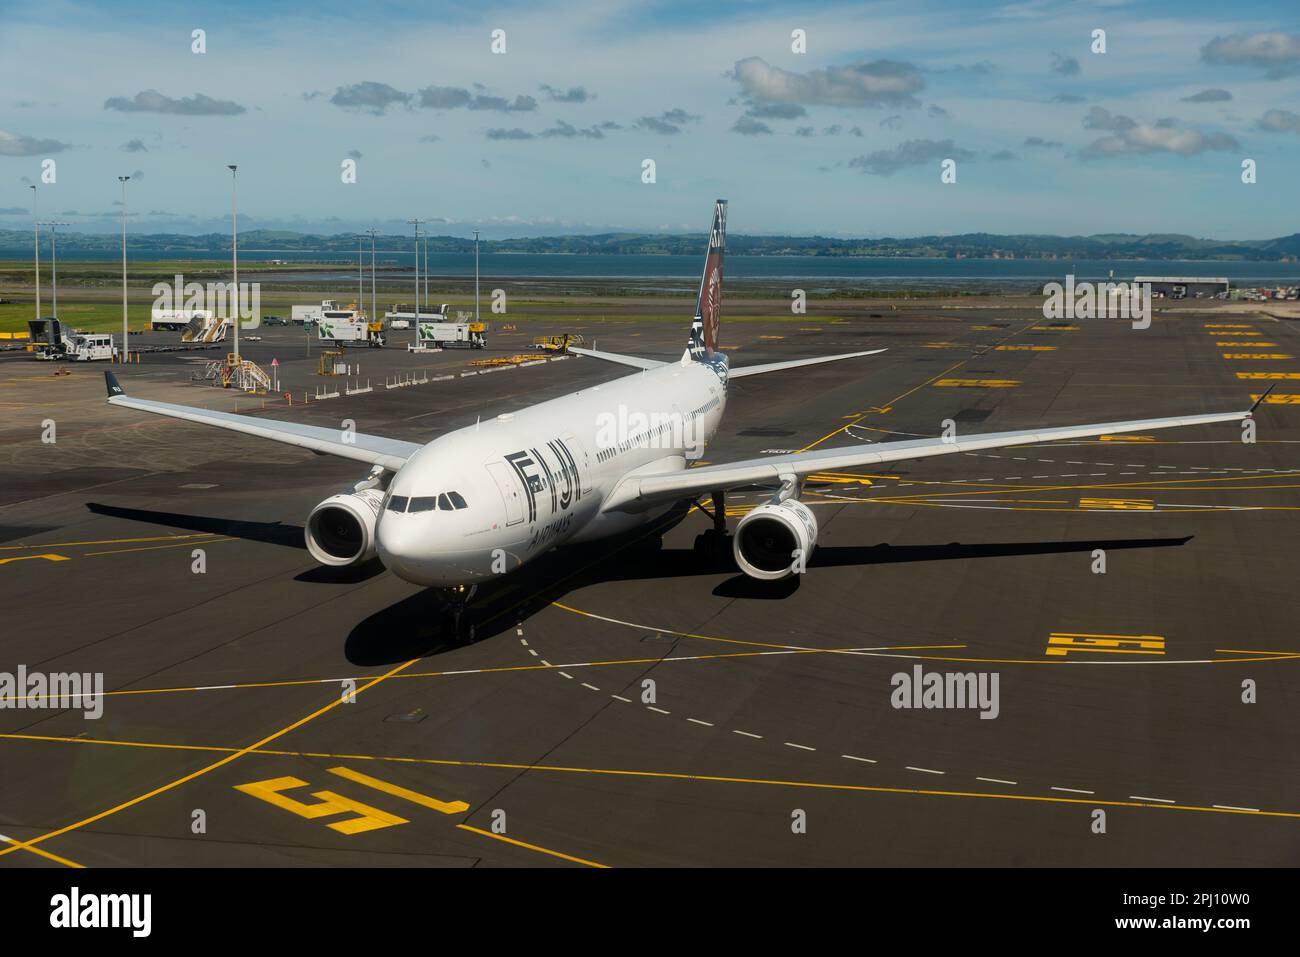 Fiji Airways Airbus A330 airliner jet plane DQ-FJV taxiing to stand at Auckland Airport, New Zealand. Taxiway markings to gate. Manukau Harbour beyond Stock Photo